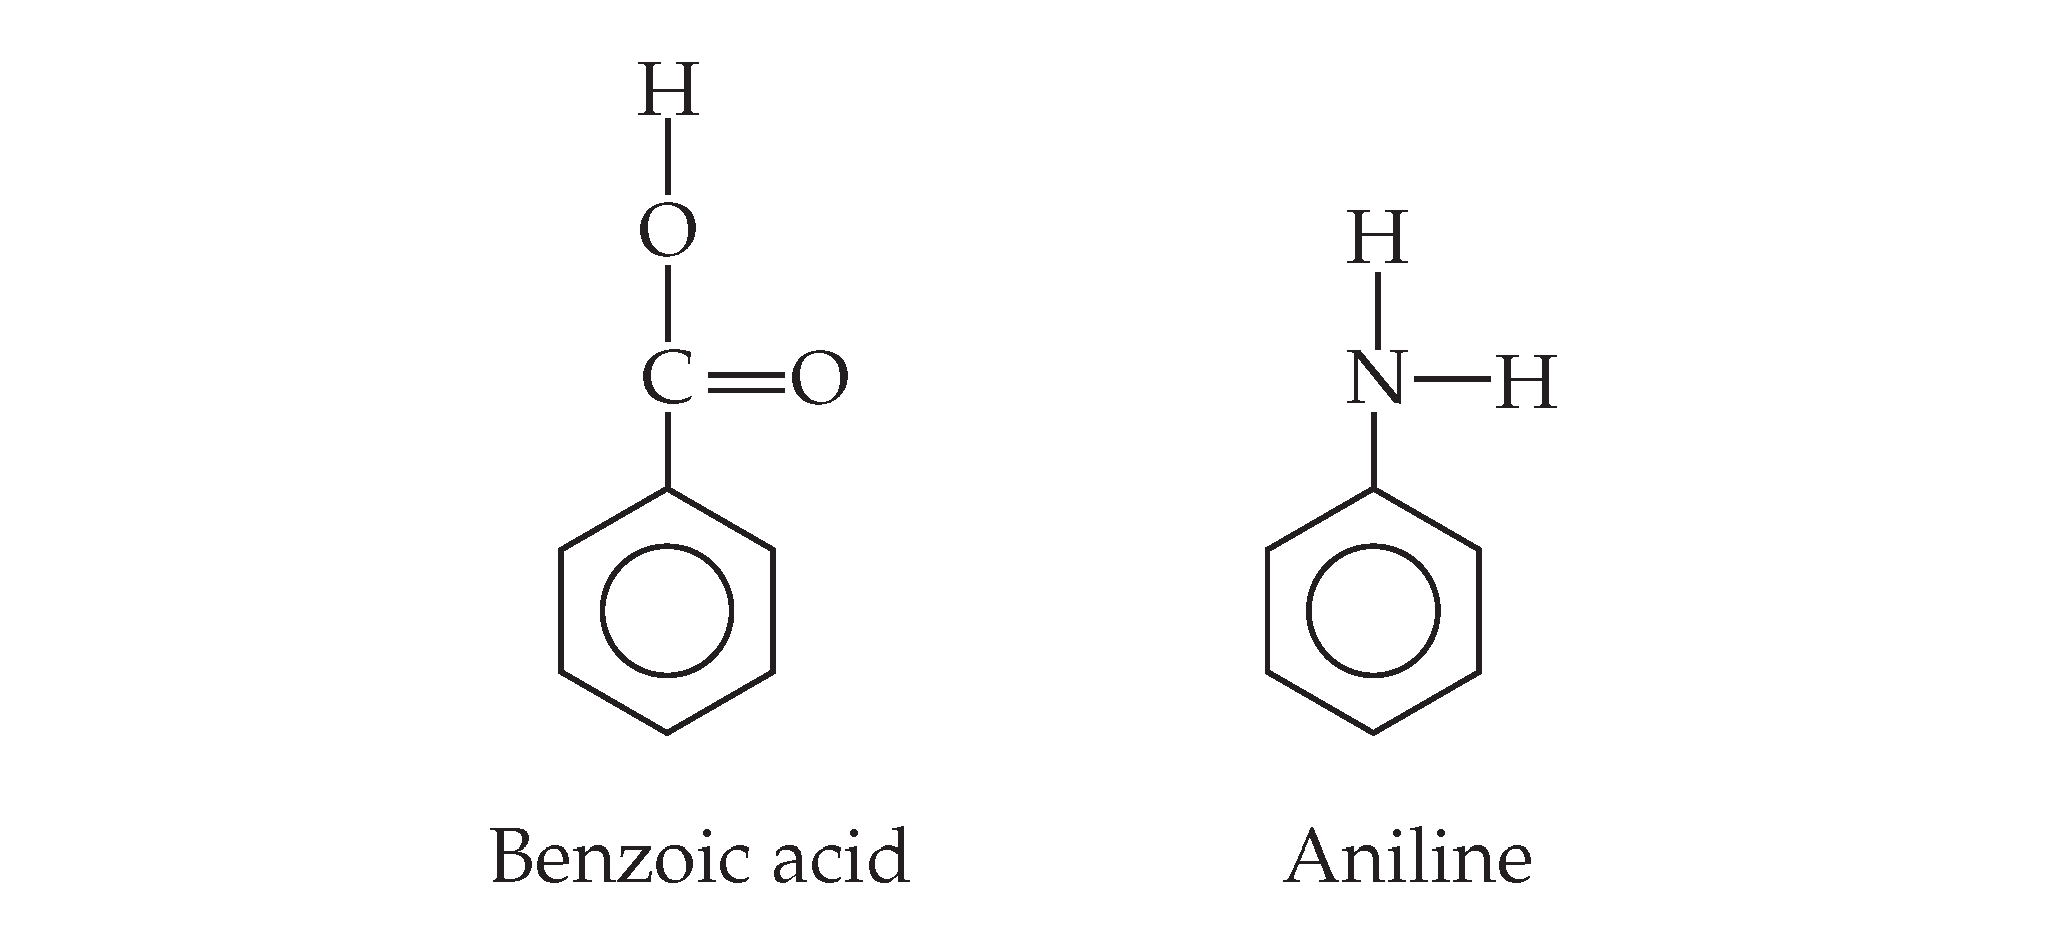 A diagram shows the chemical structure of benzoic acid and aniline.